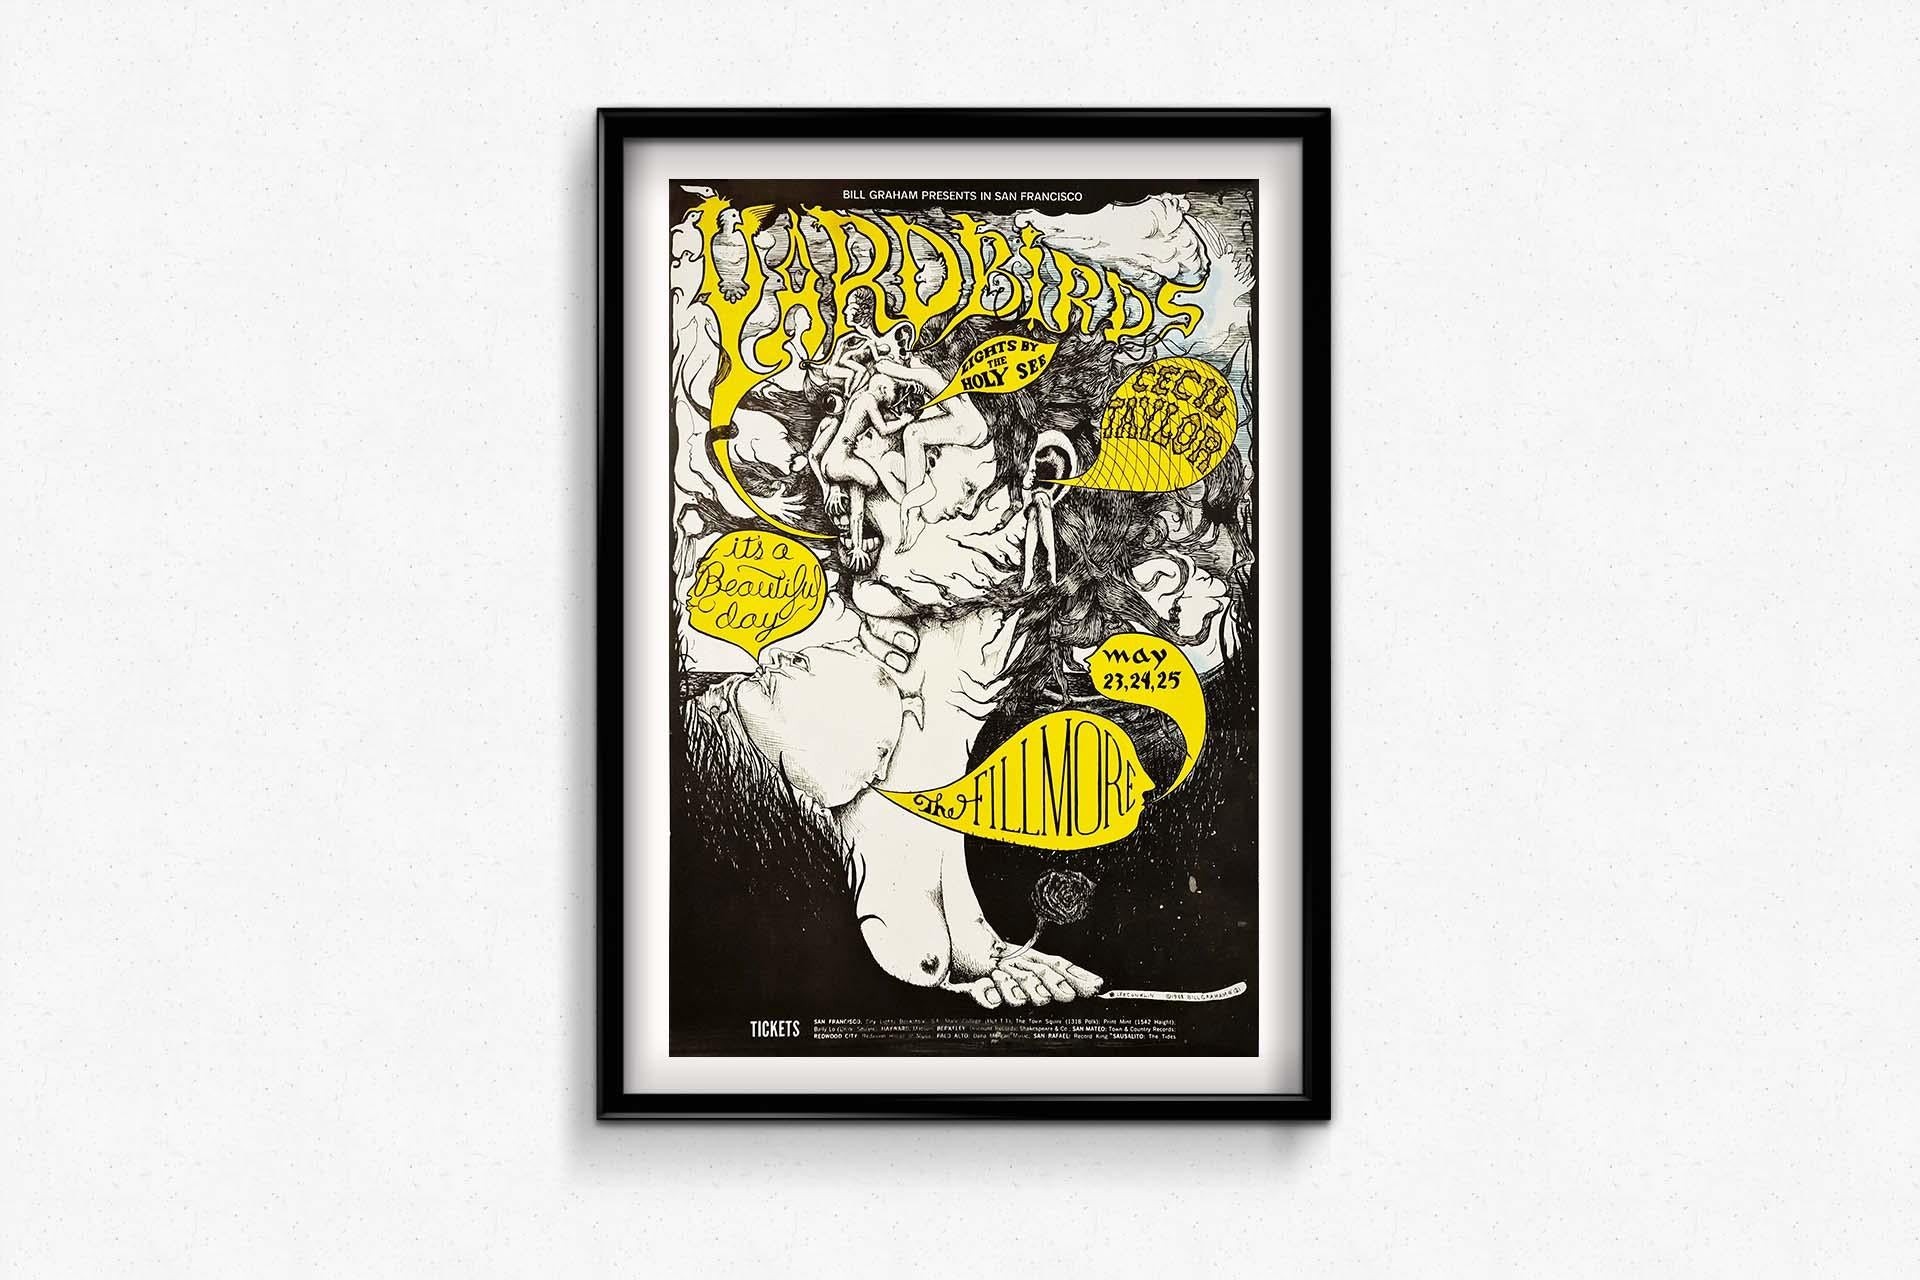 1968 Psychedelic poster for the Yardbirds, It’s a beautiful day and Cecil Taylor For Sale 1